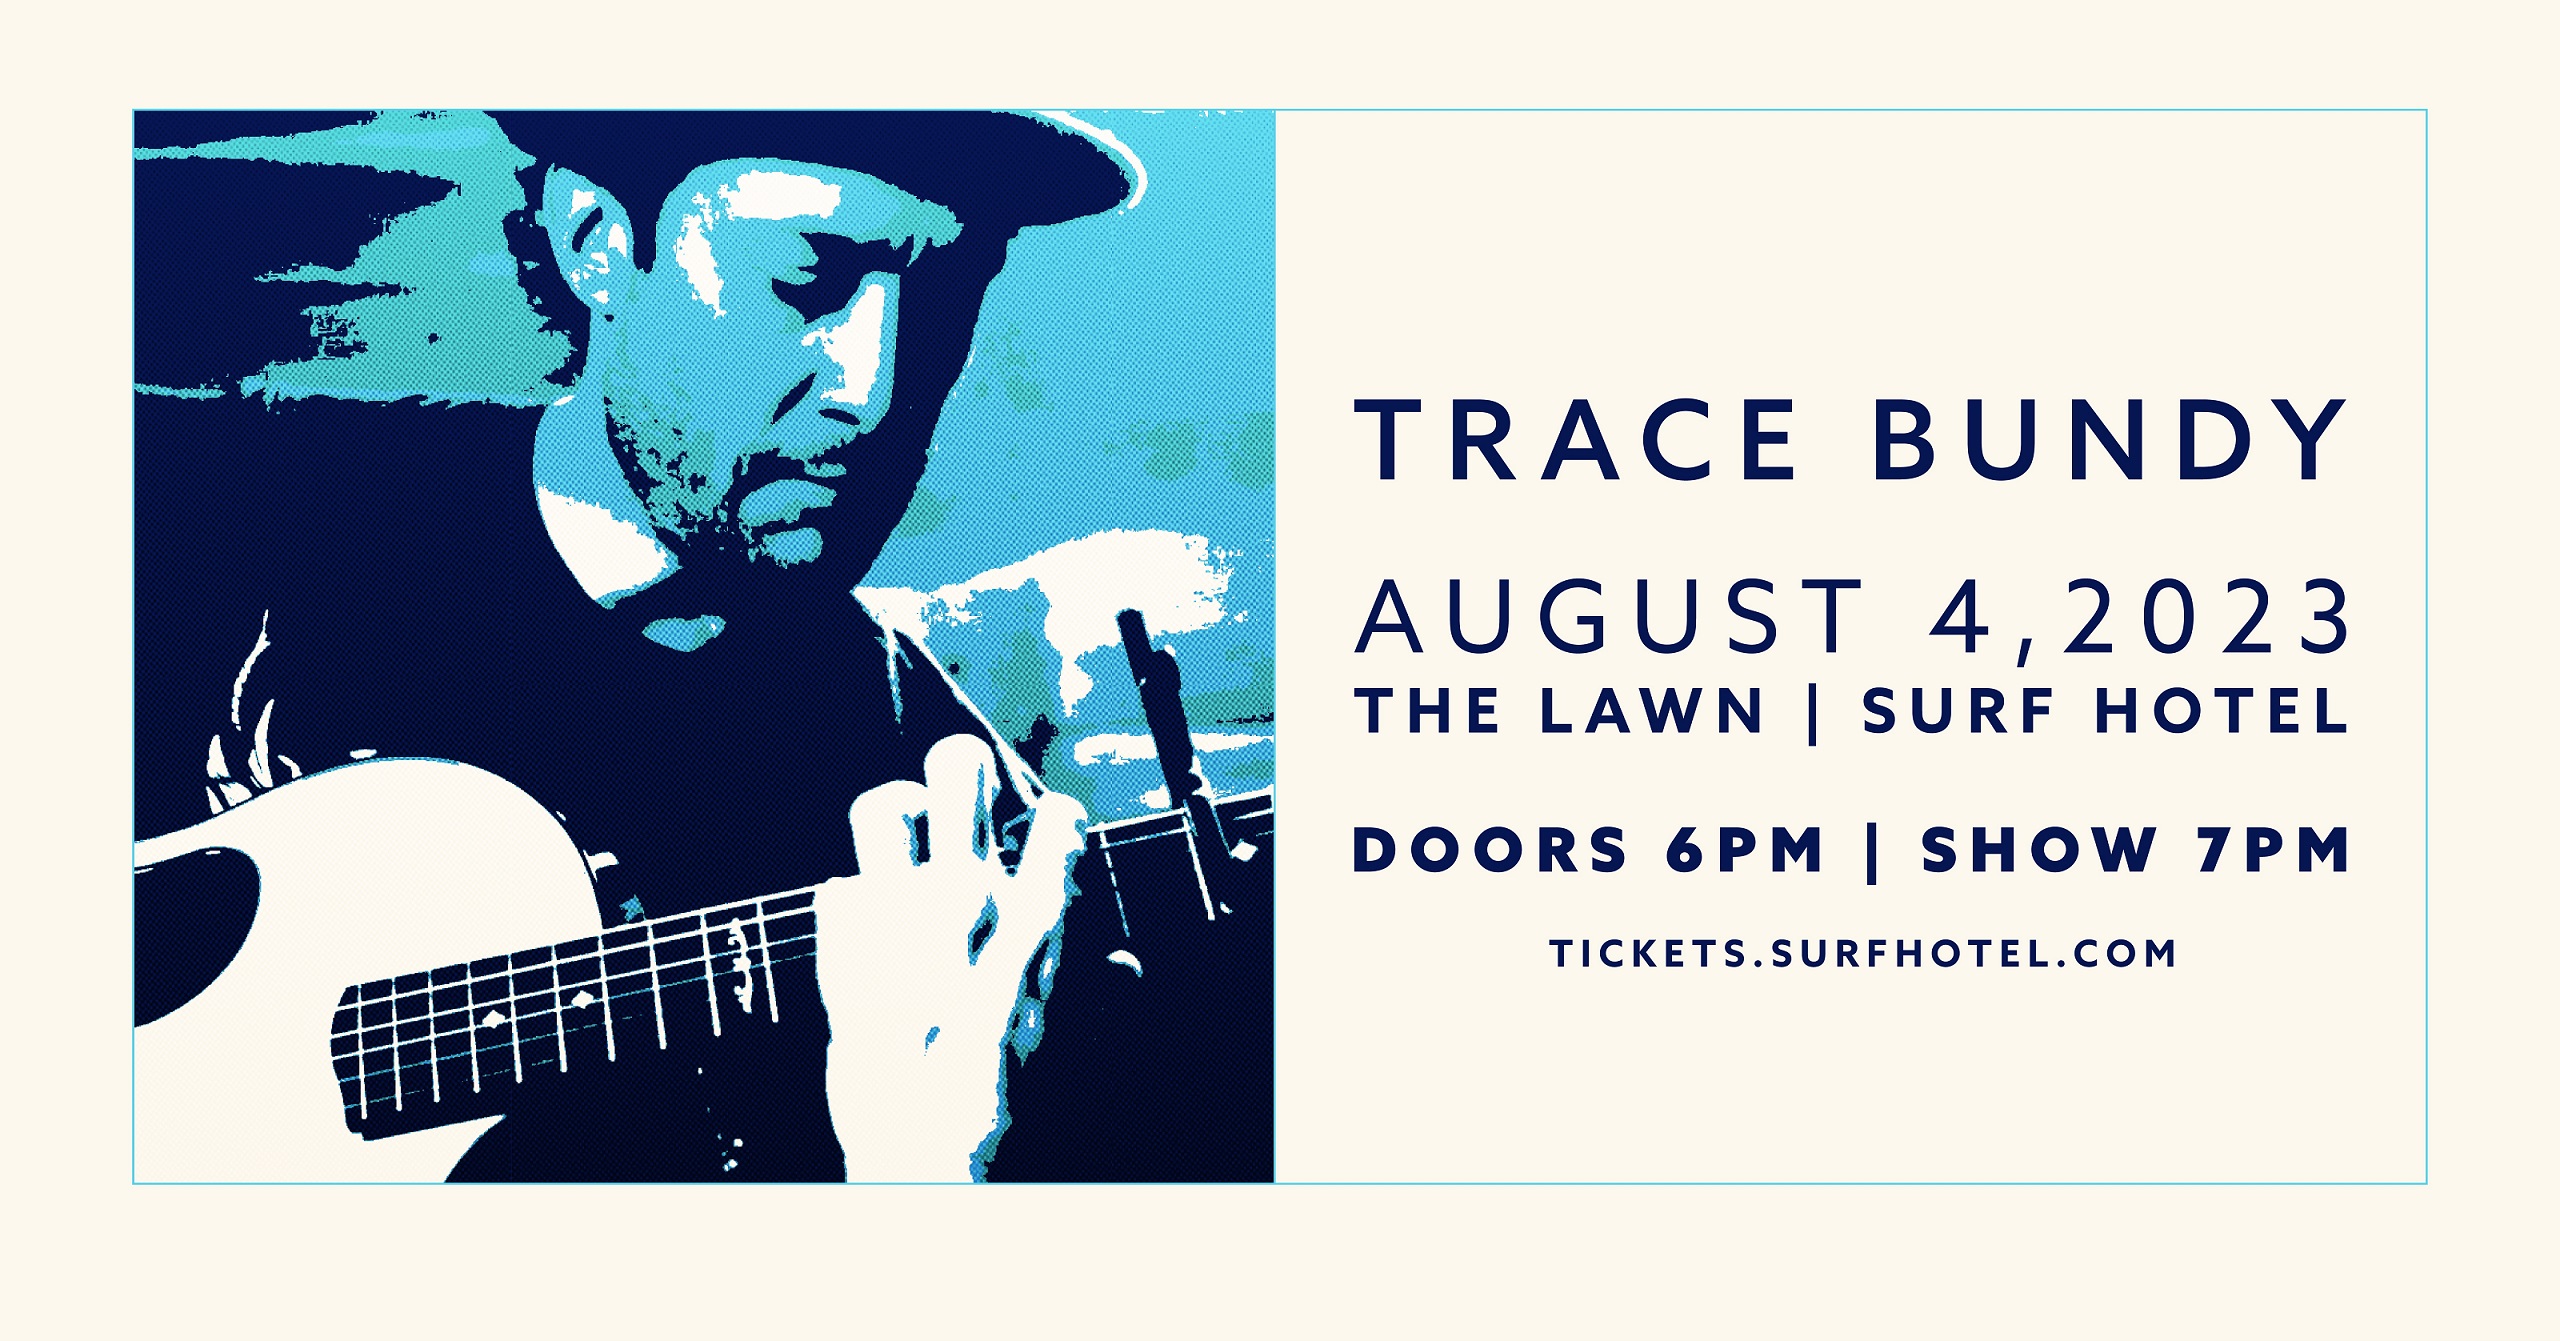 Trace Bundy Returns to His Hometown Buena Vista, Colorado for His Debut Performance on the Lawn,  At Surf Hotel, Friday, August 4th